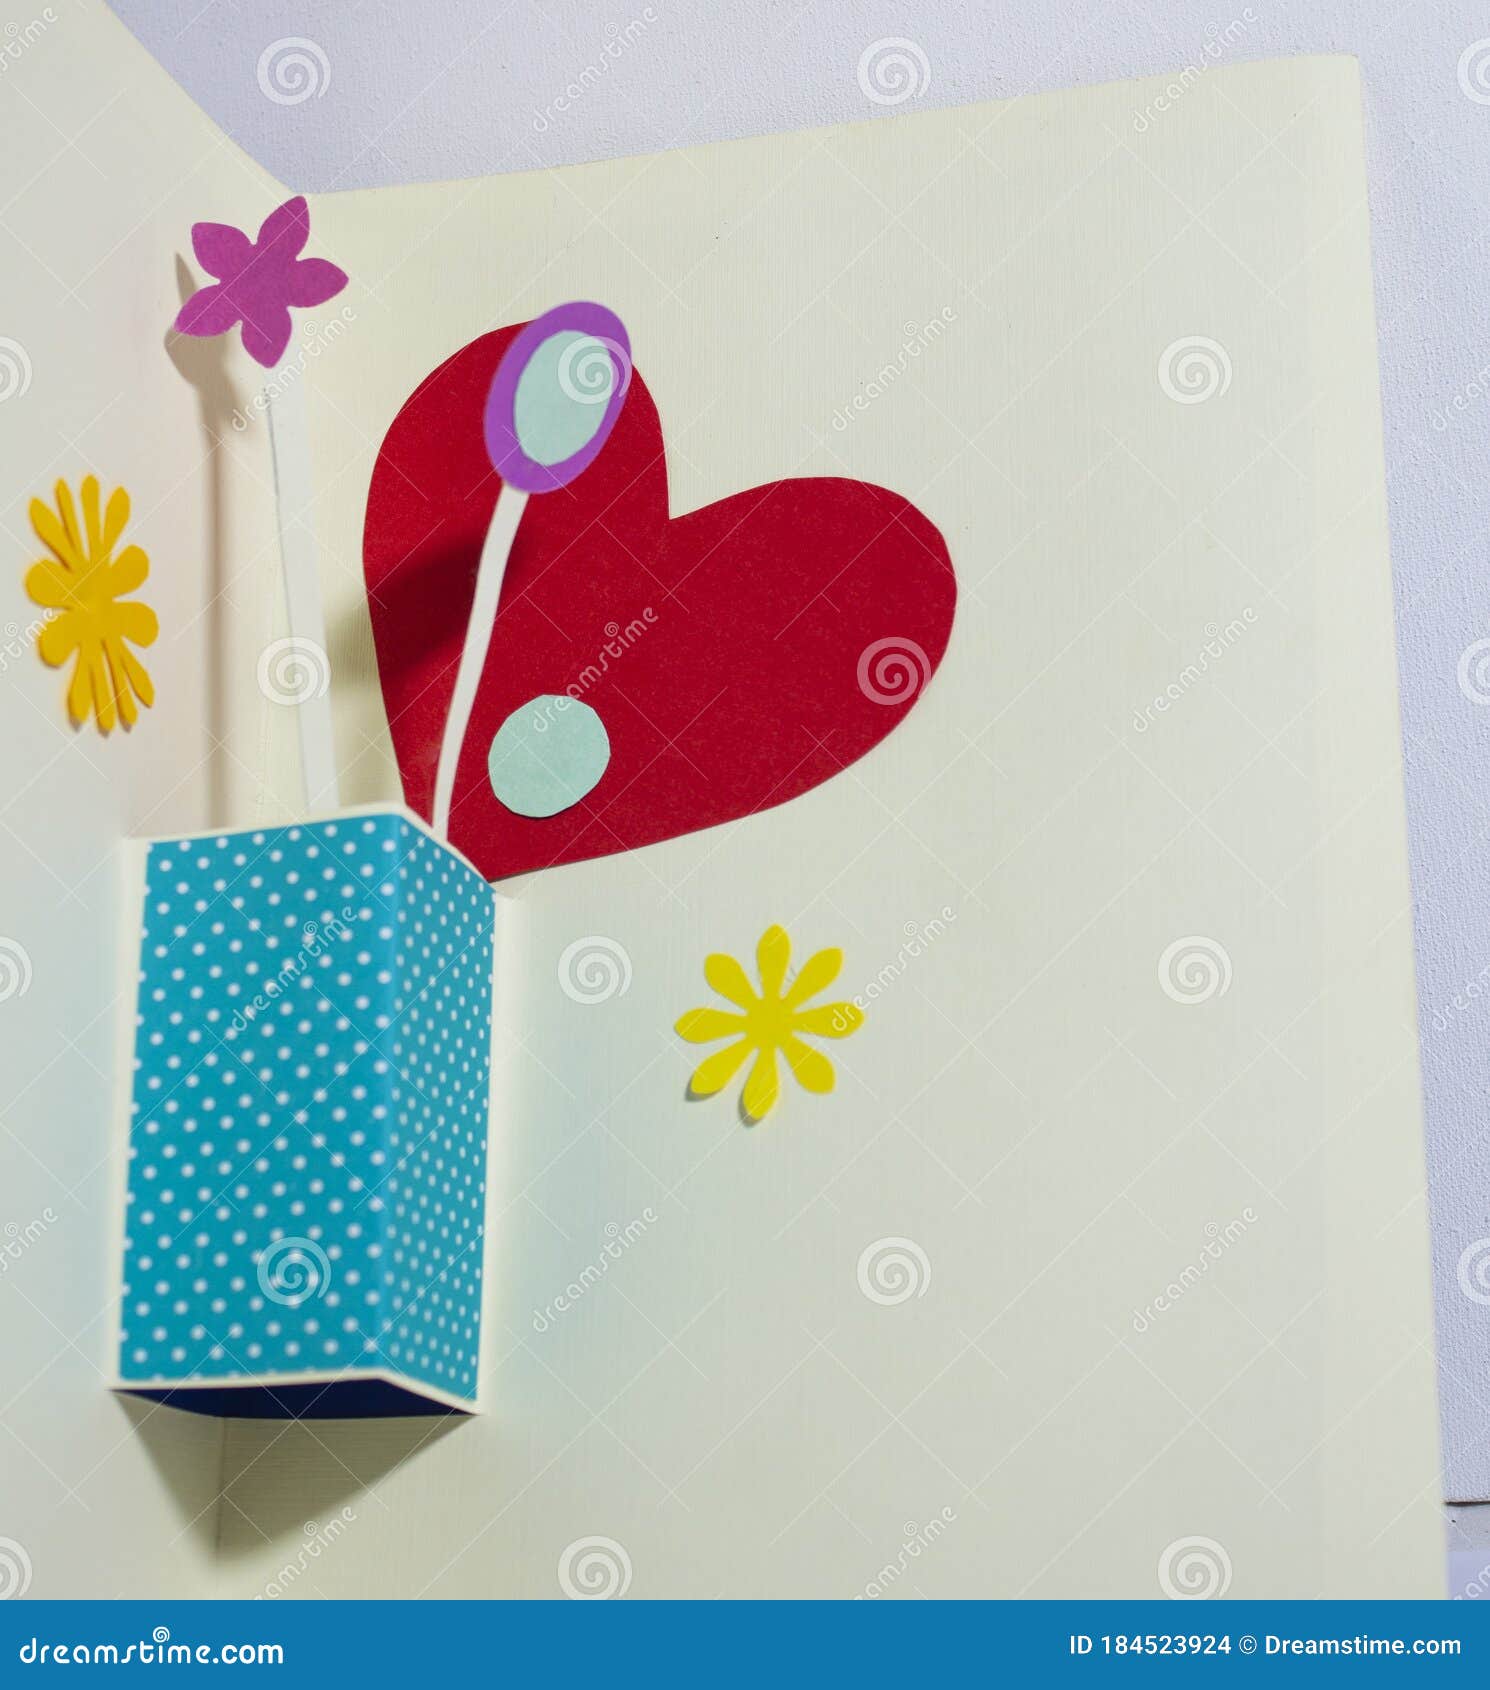 artistic flowers paper anniversary card craft